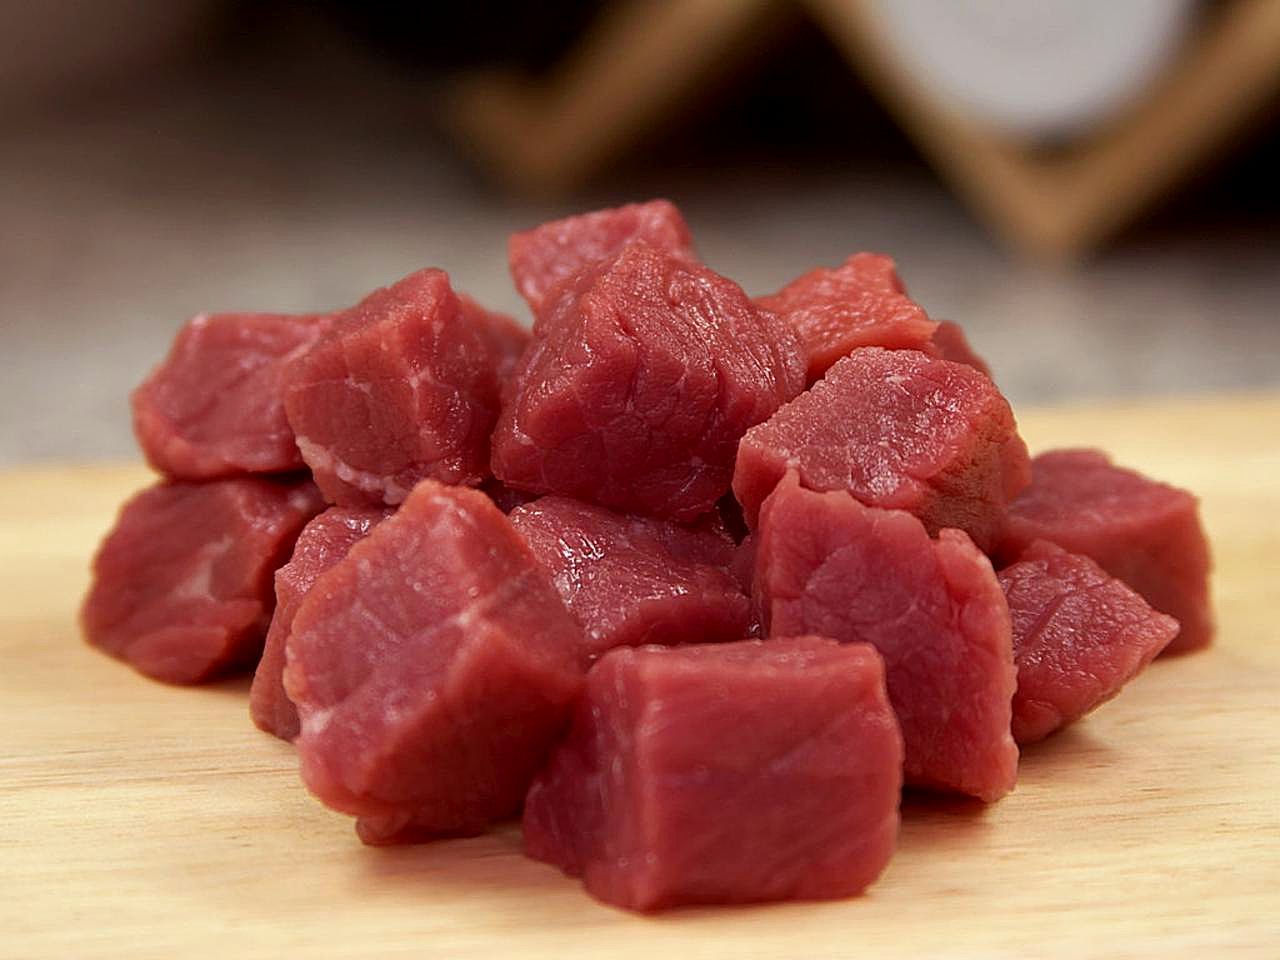 Consumption of unprocessed red meat higher than recommended level in US, finds study